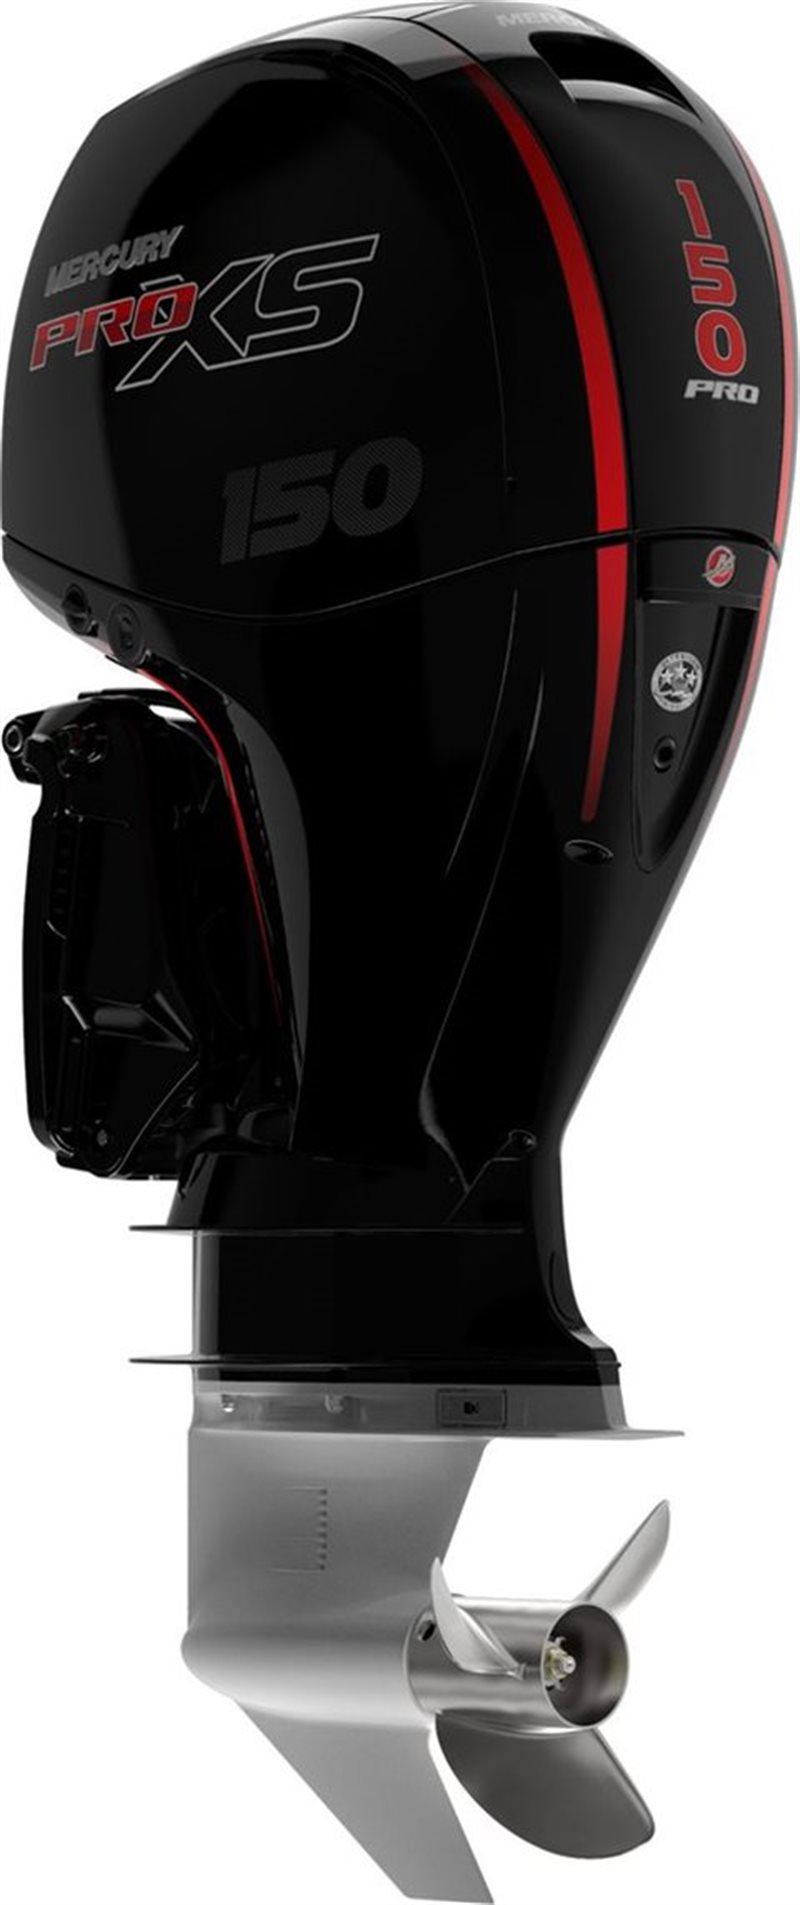 2021 Mercury Outboard 150 Pro XS 150 Pro XS at Fort Fremont Marine